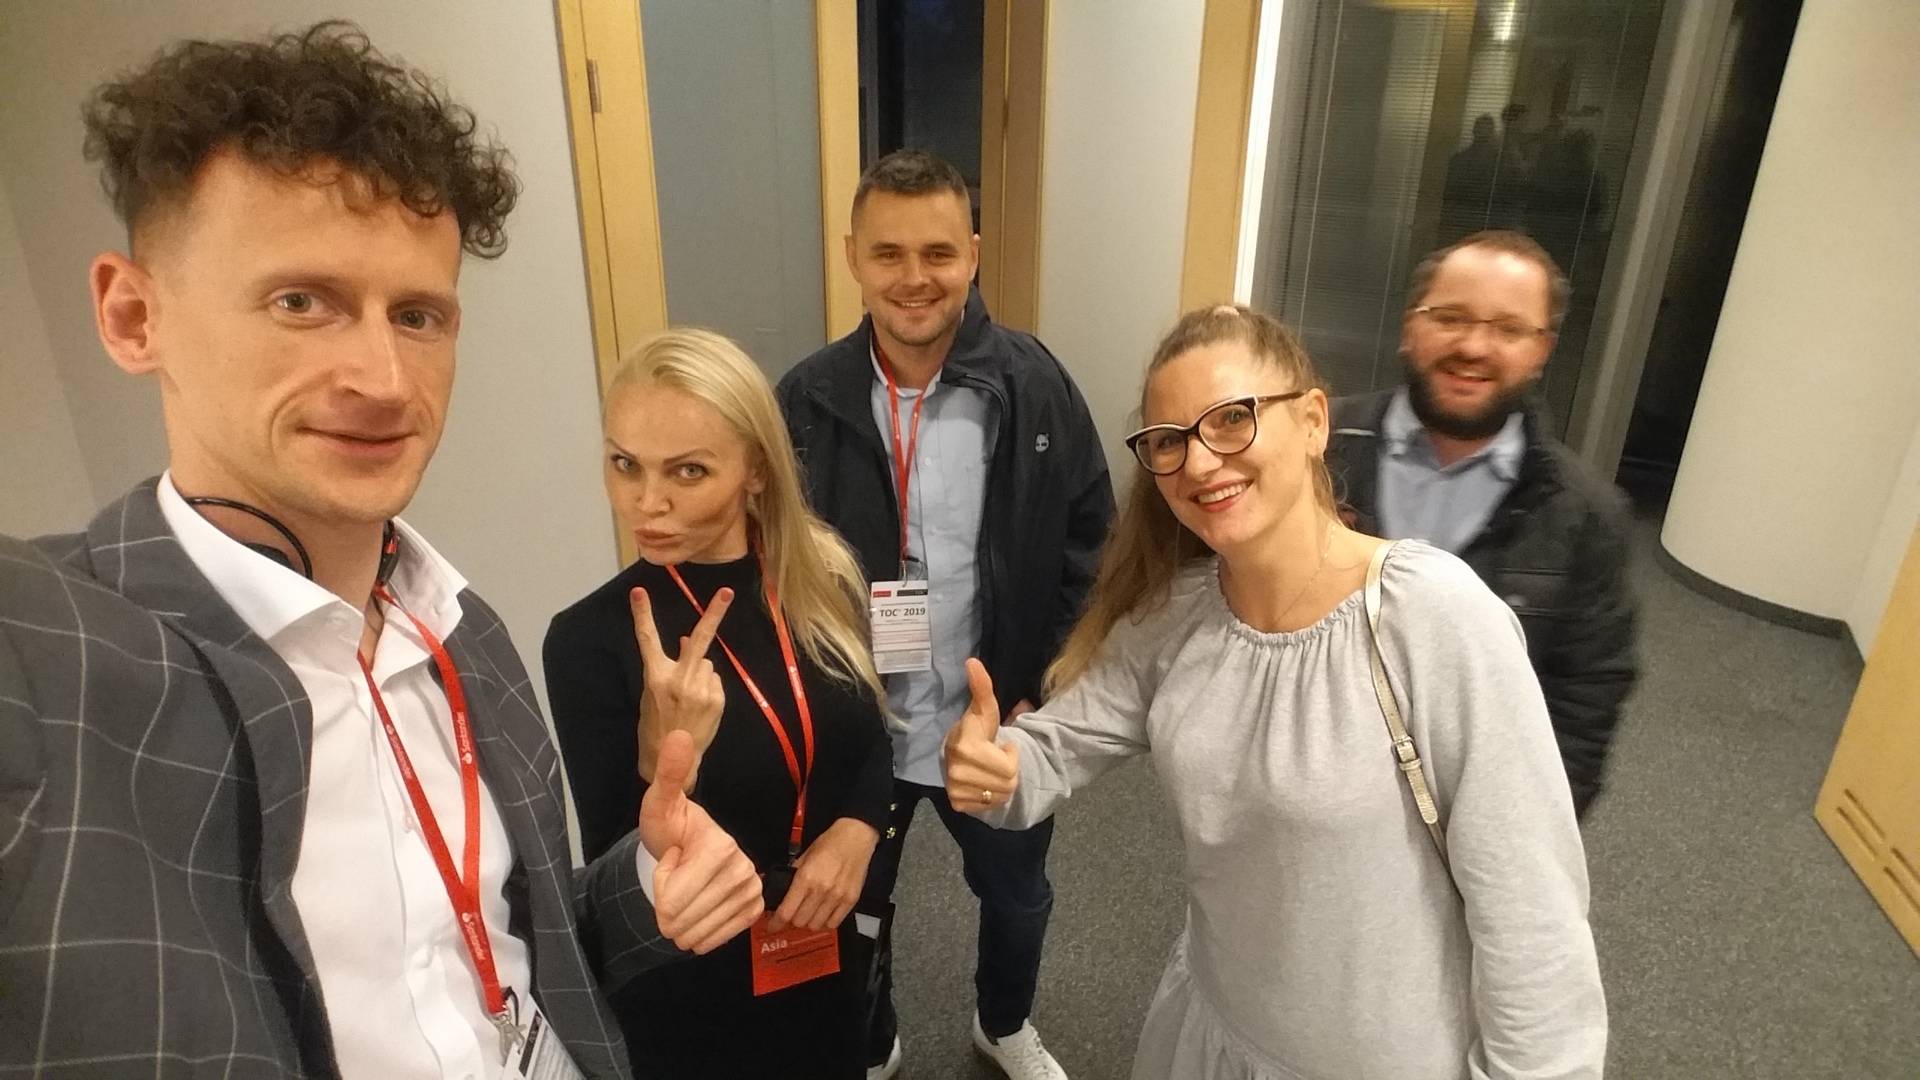 Selfie with Joanna Drucka - Podbereska and one of the last attendees leaving the event